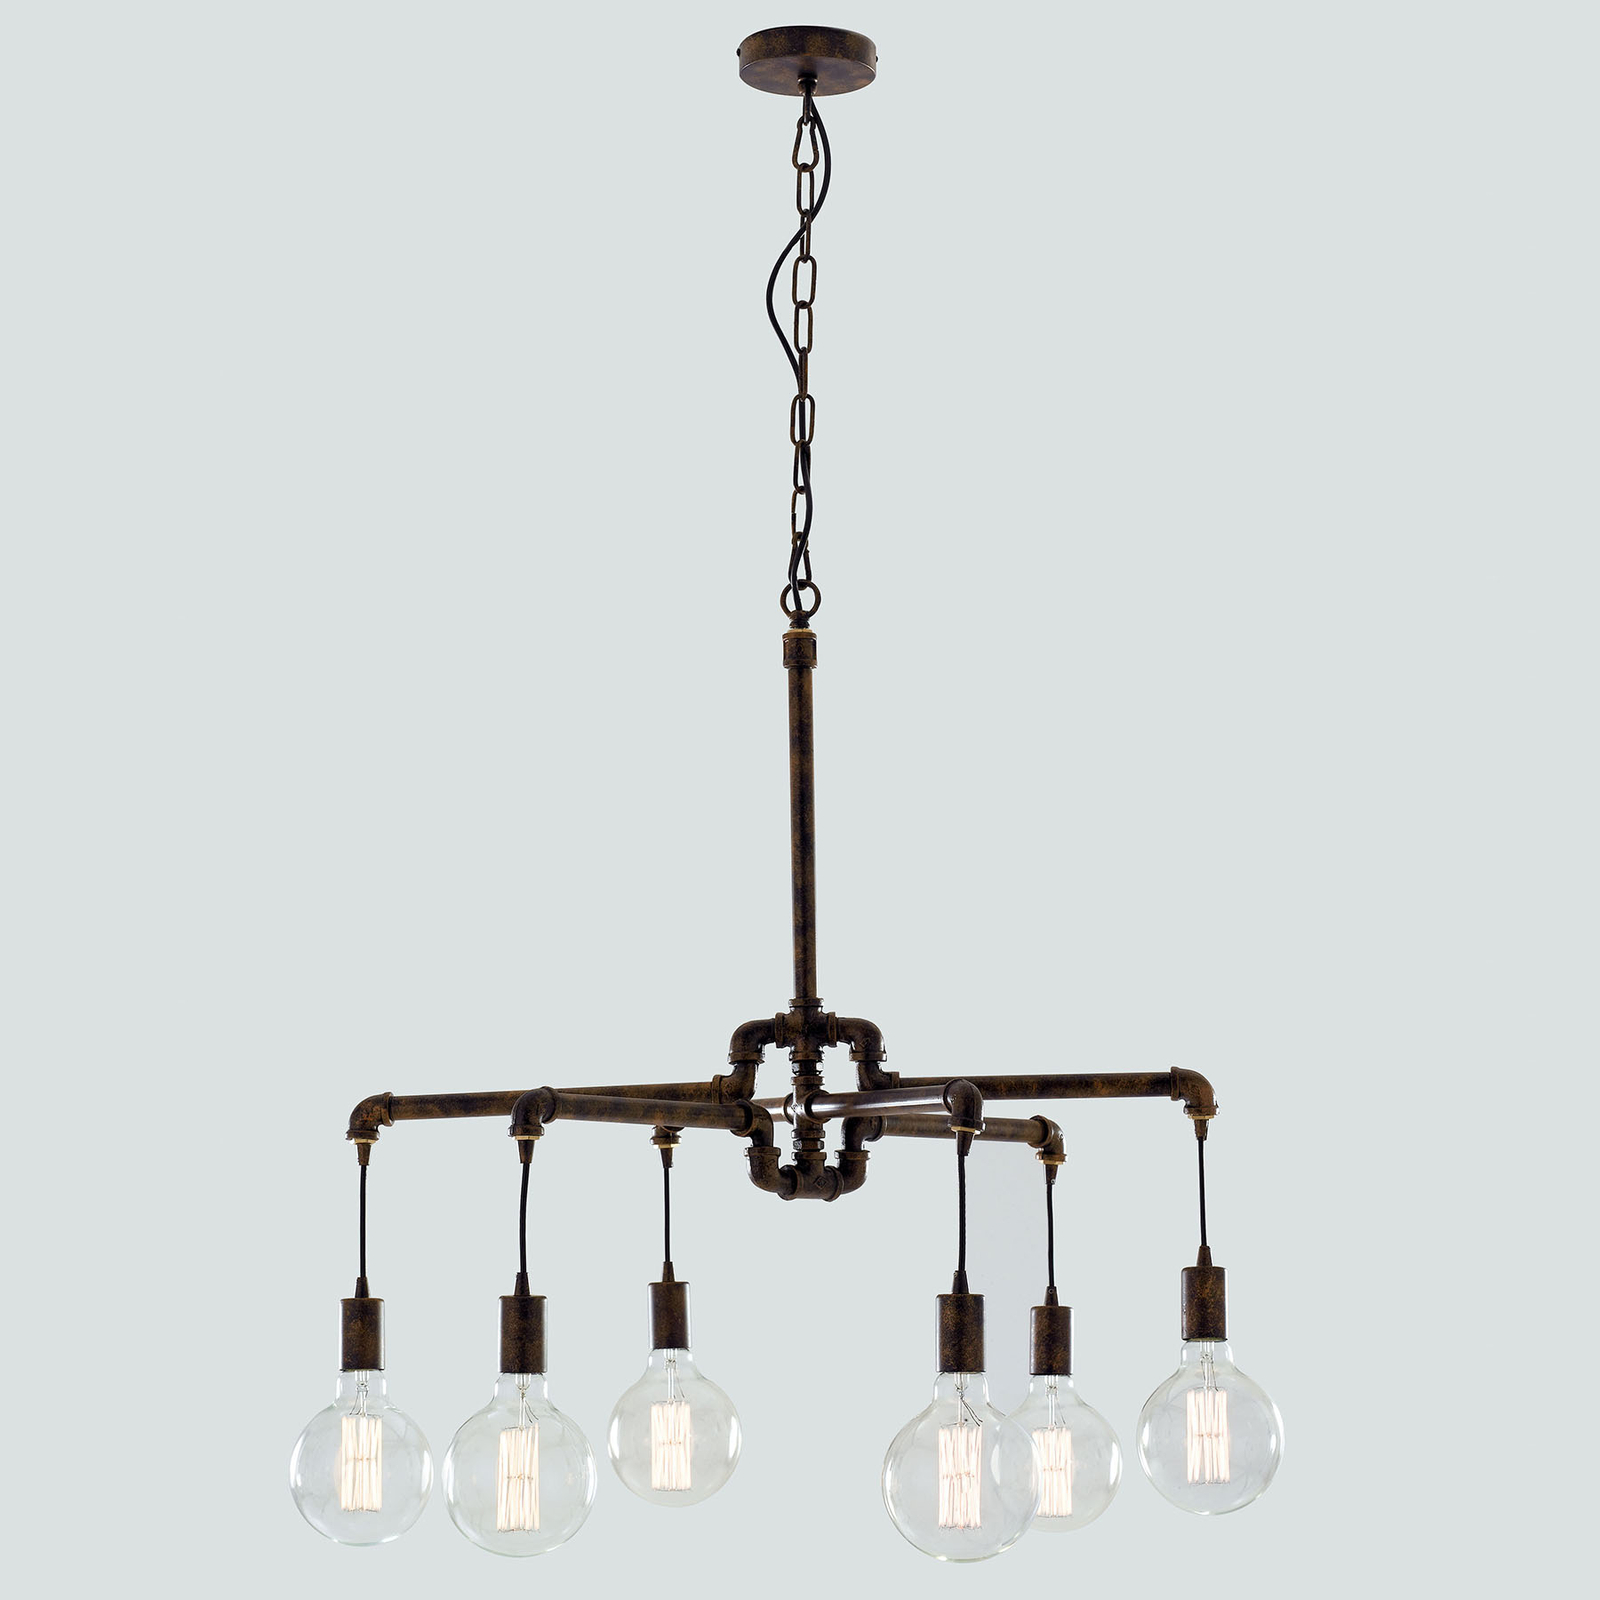 Amarcord hanging light, rusty brown, 6-bulb